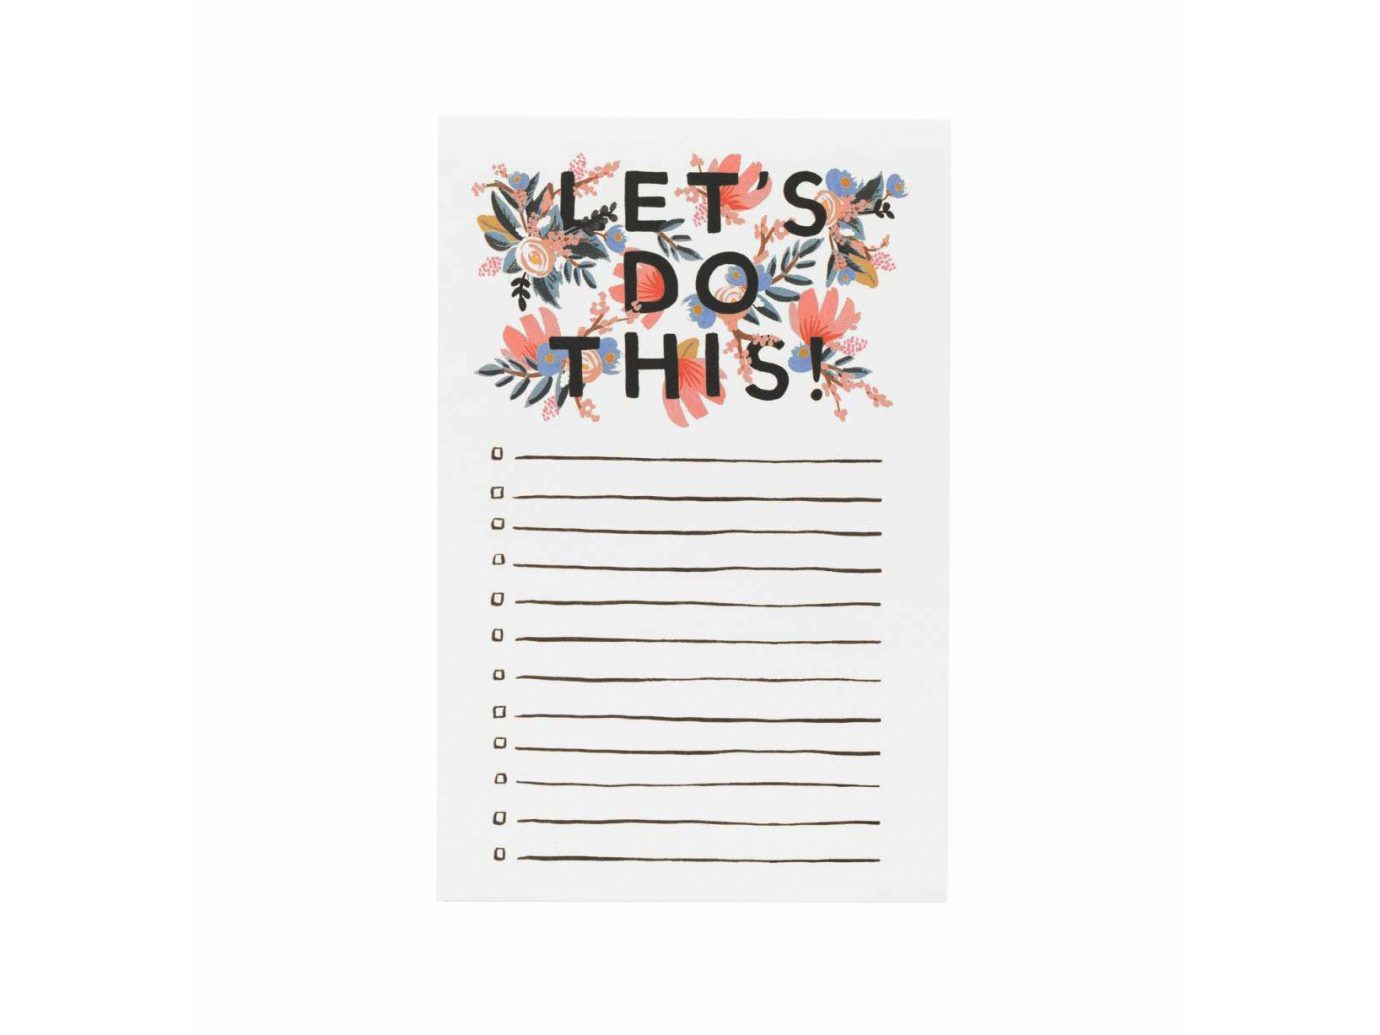 Buy TRifle Paper Co. Notepad on Amazon